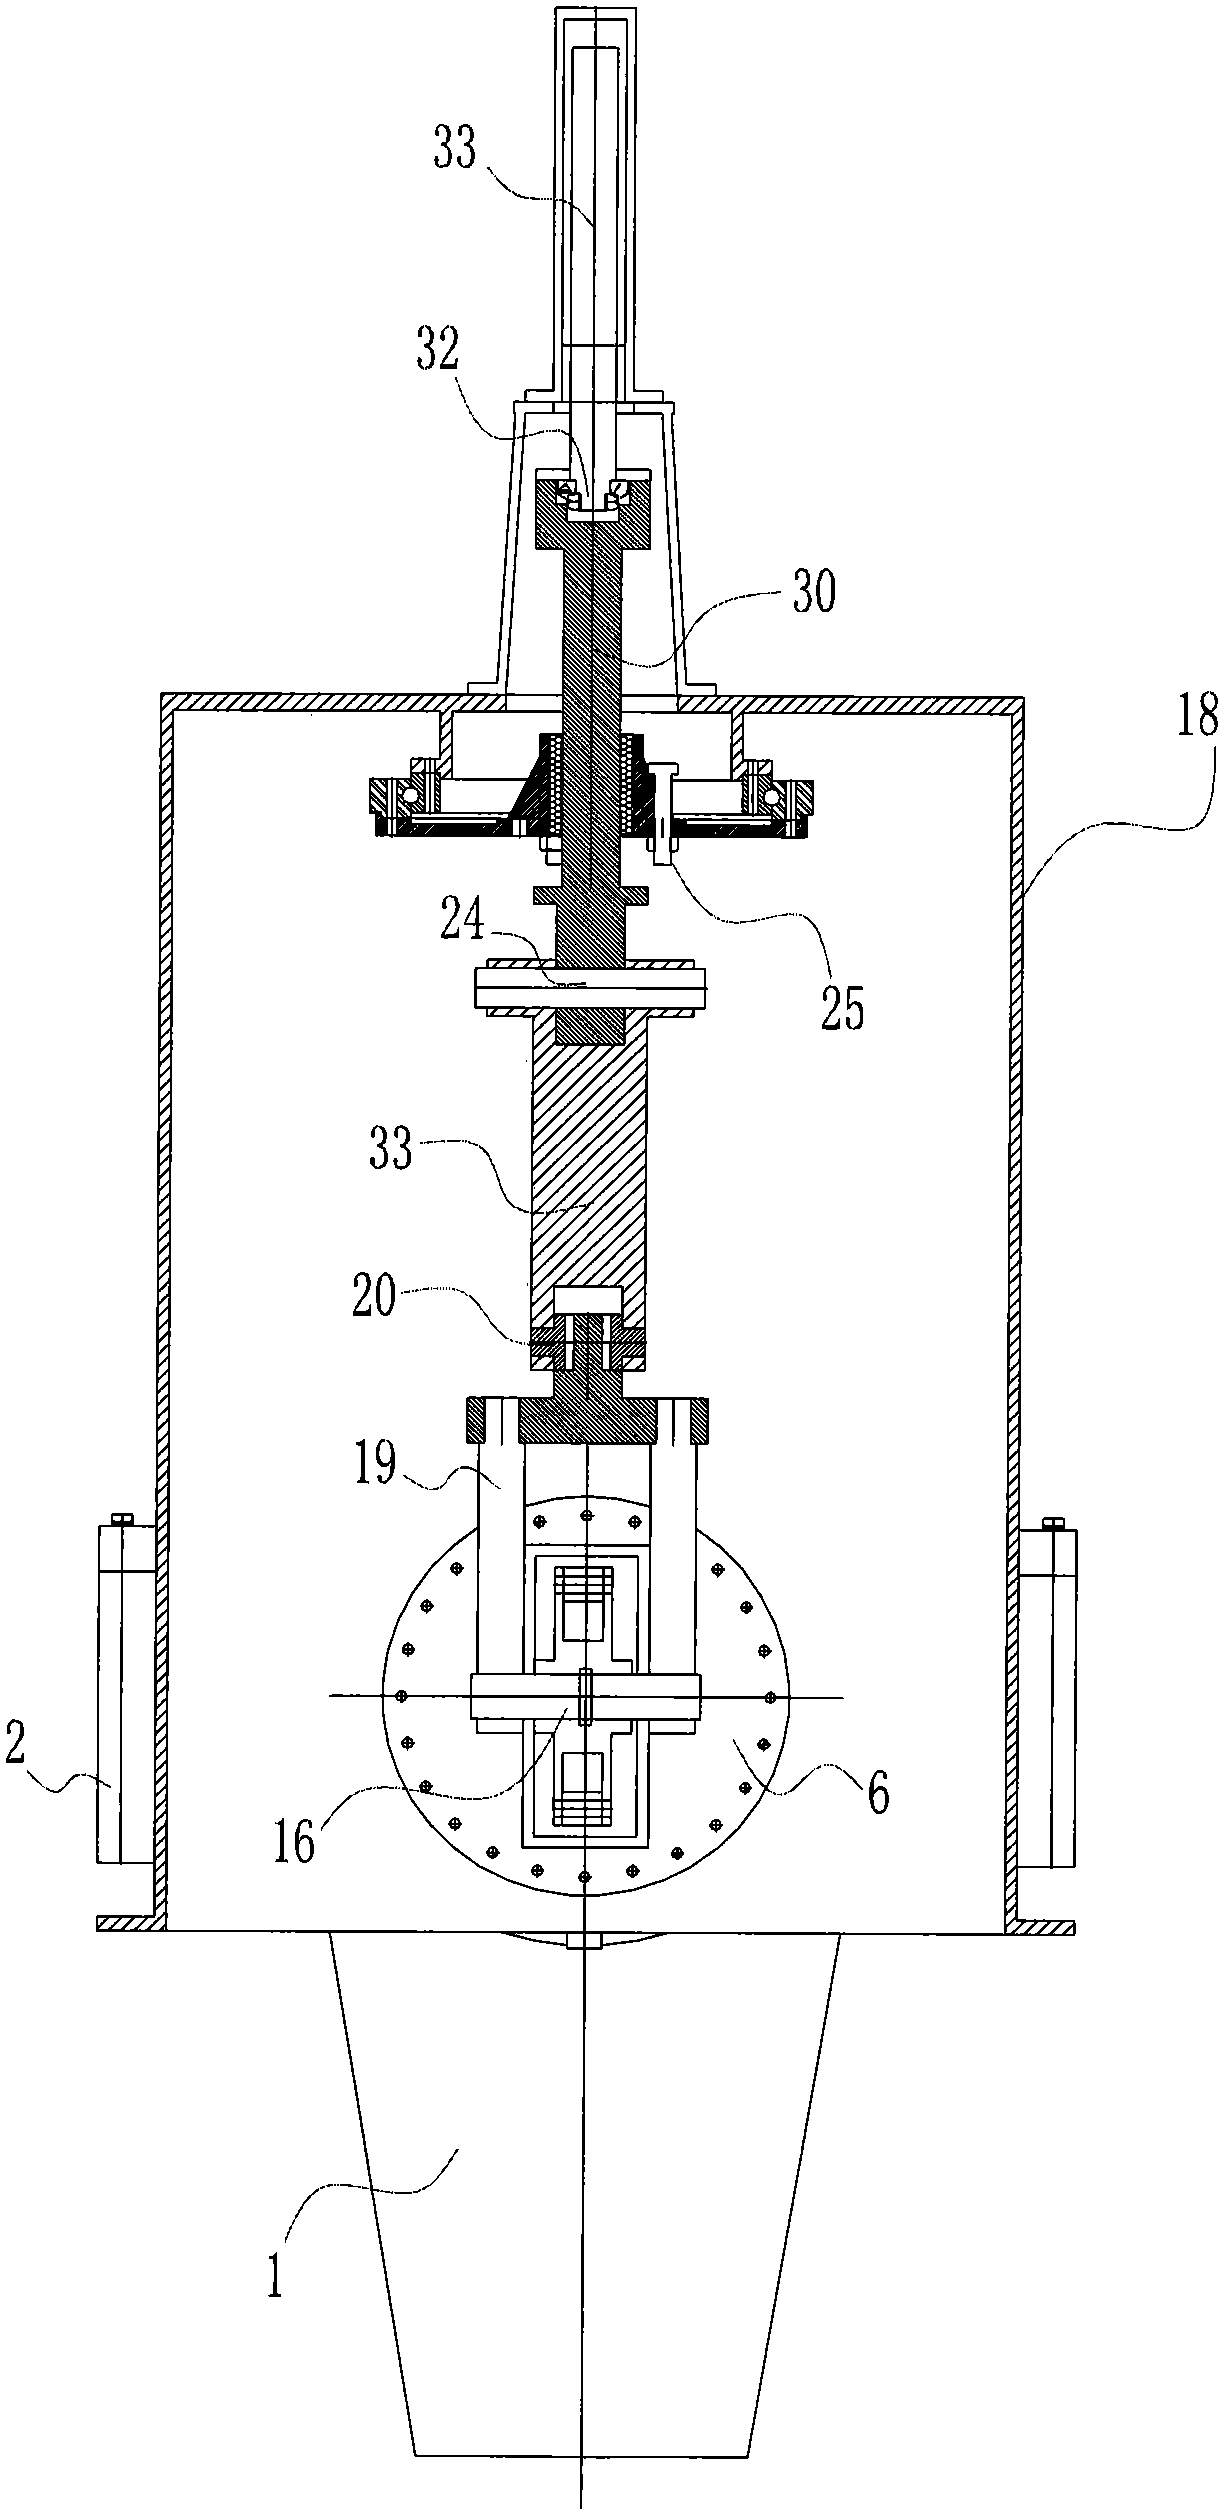 A cone-shaped shaker distributor